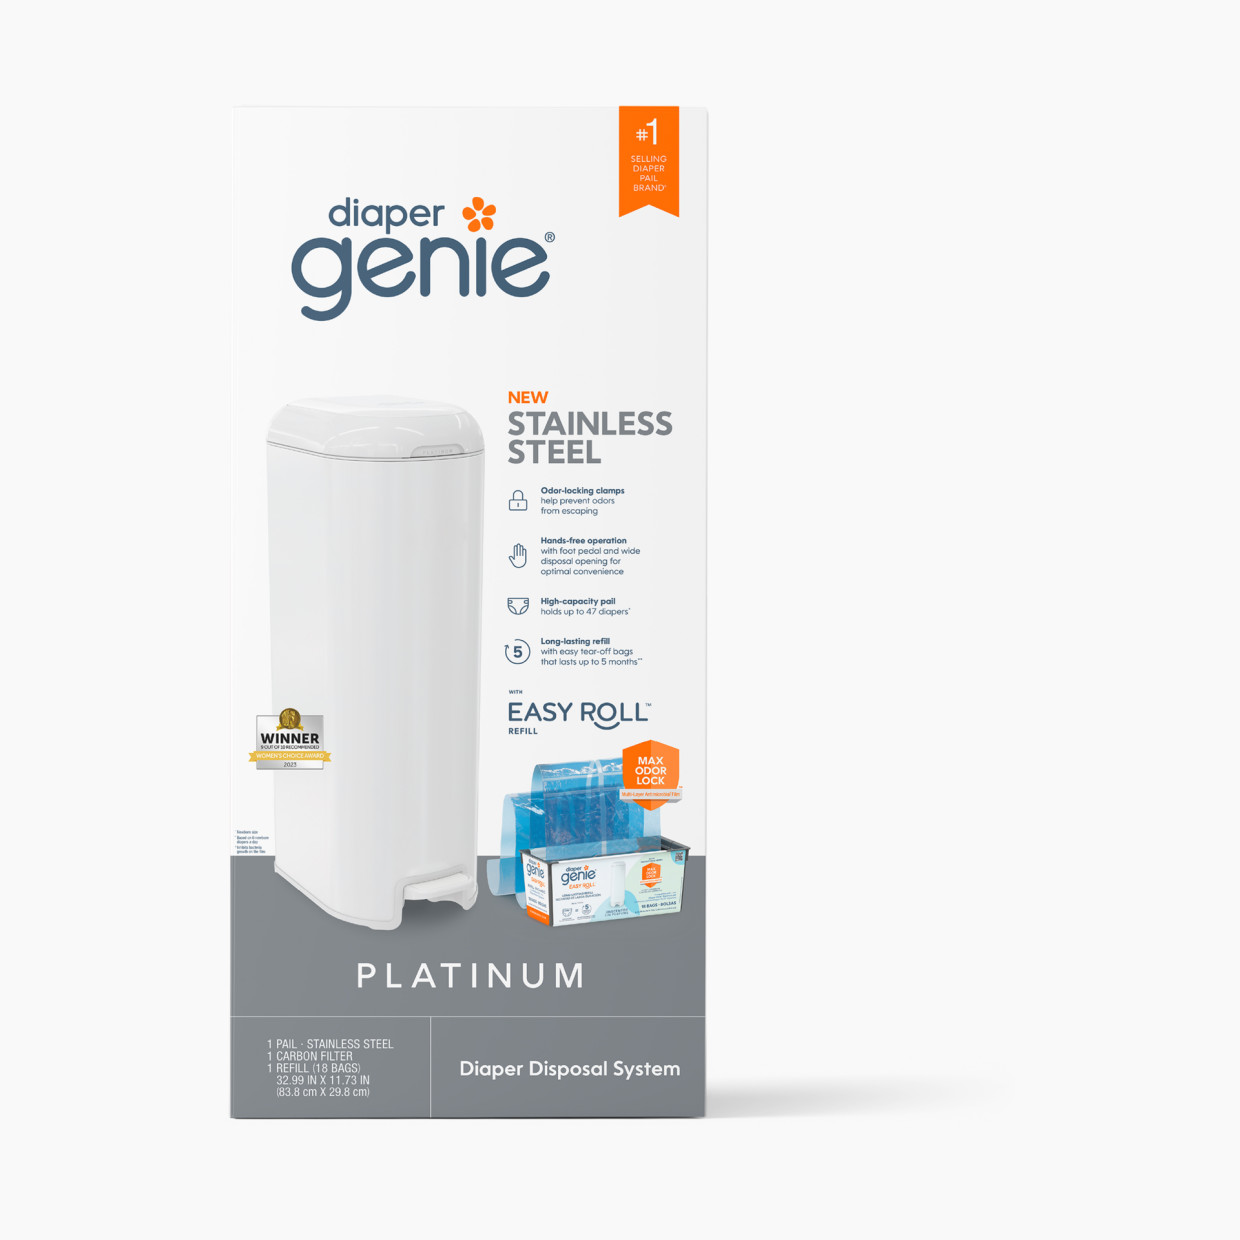 Diaper Genie Platinum Stainless Steel Diaper Pail with Easy Roll Refill Bags - White, Unscented.